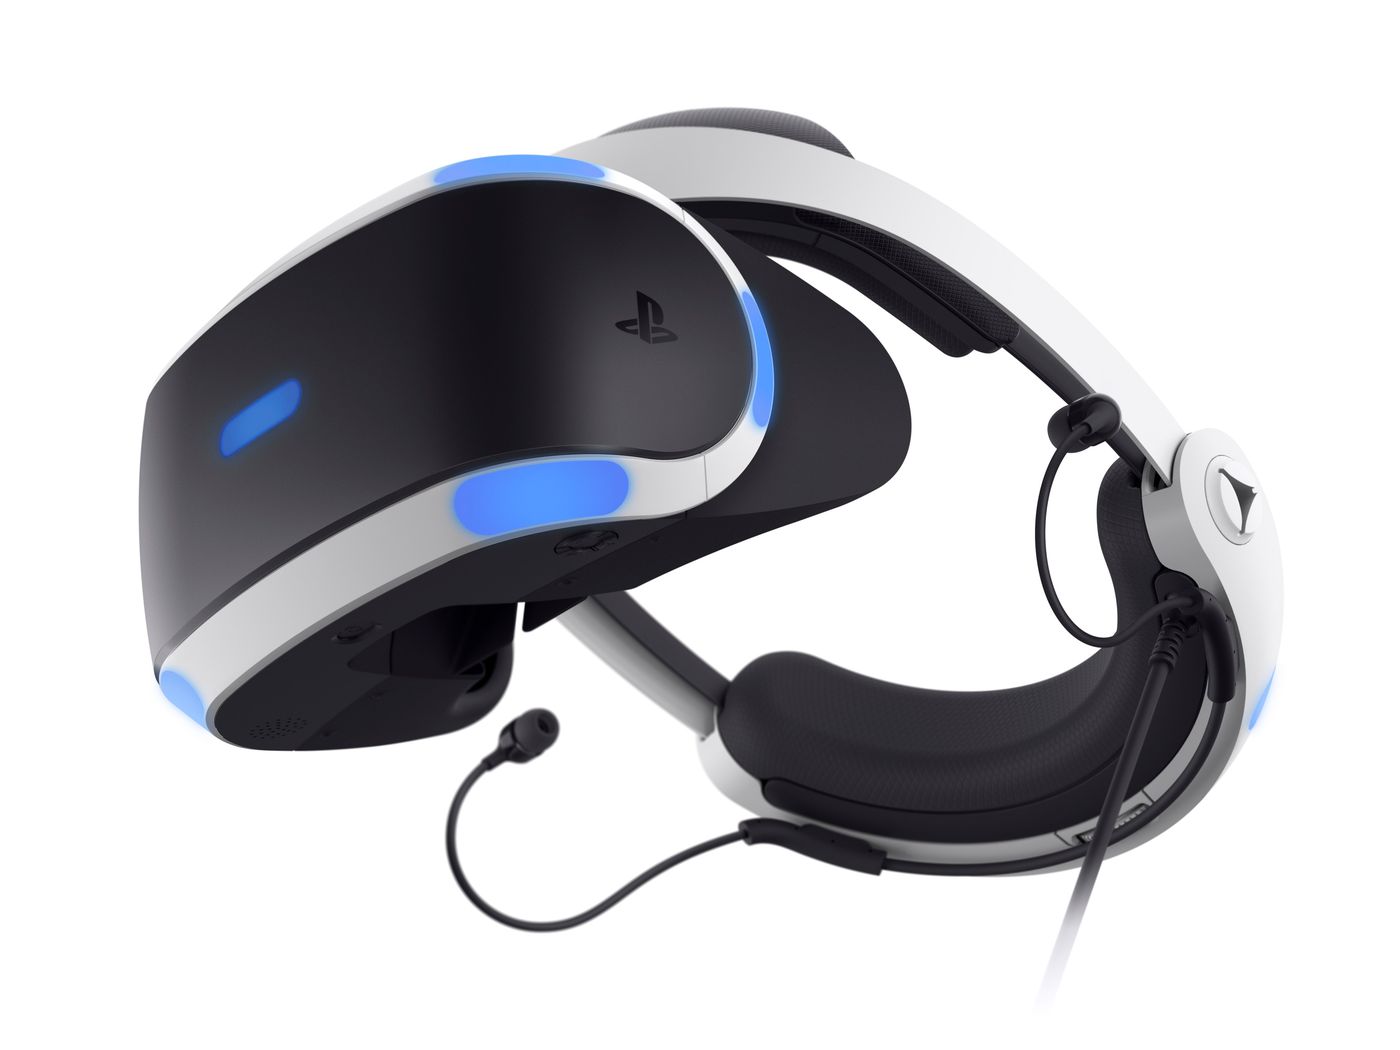 New PlayStation VR hardware includes small but welcome changes 